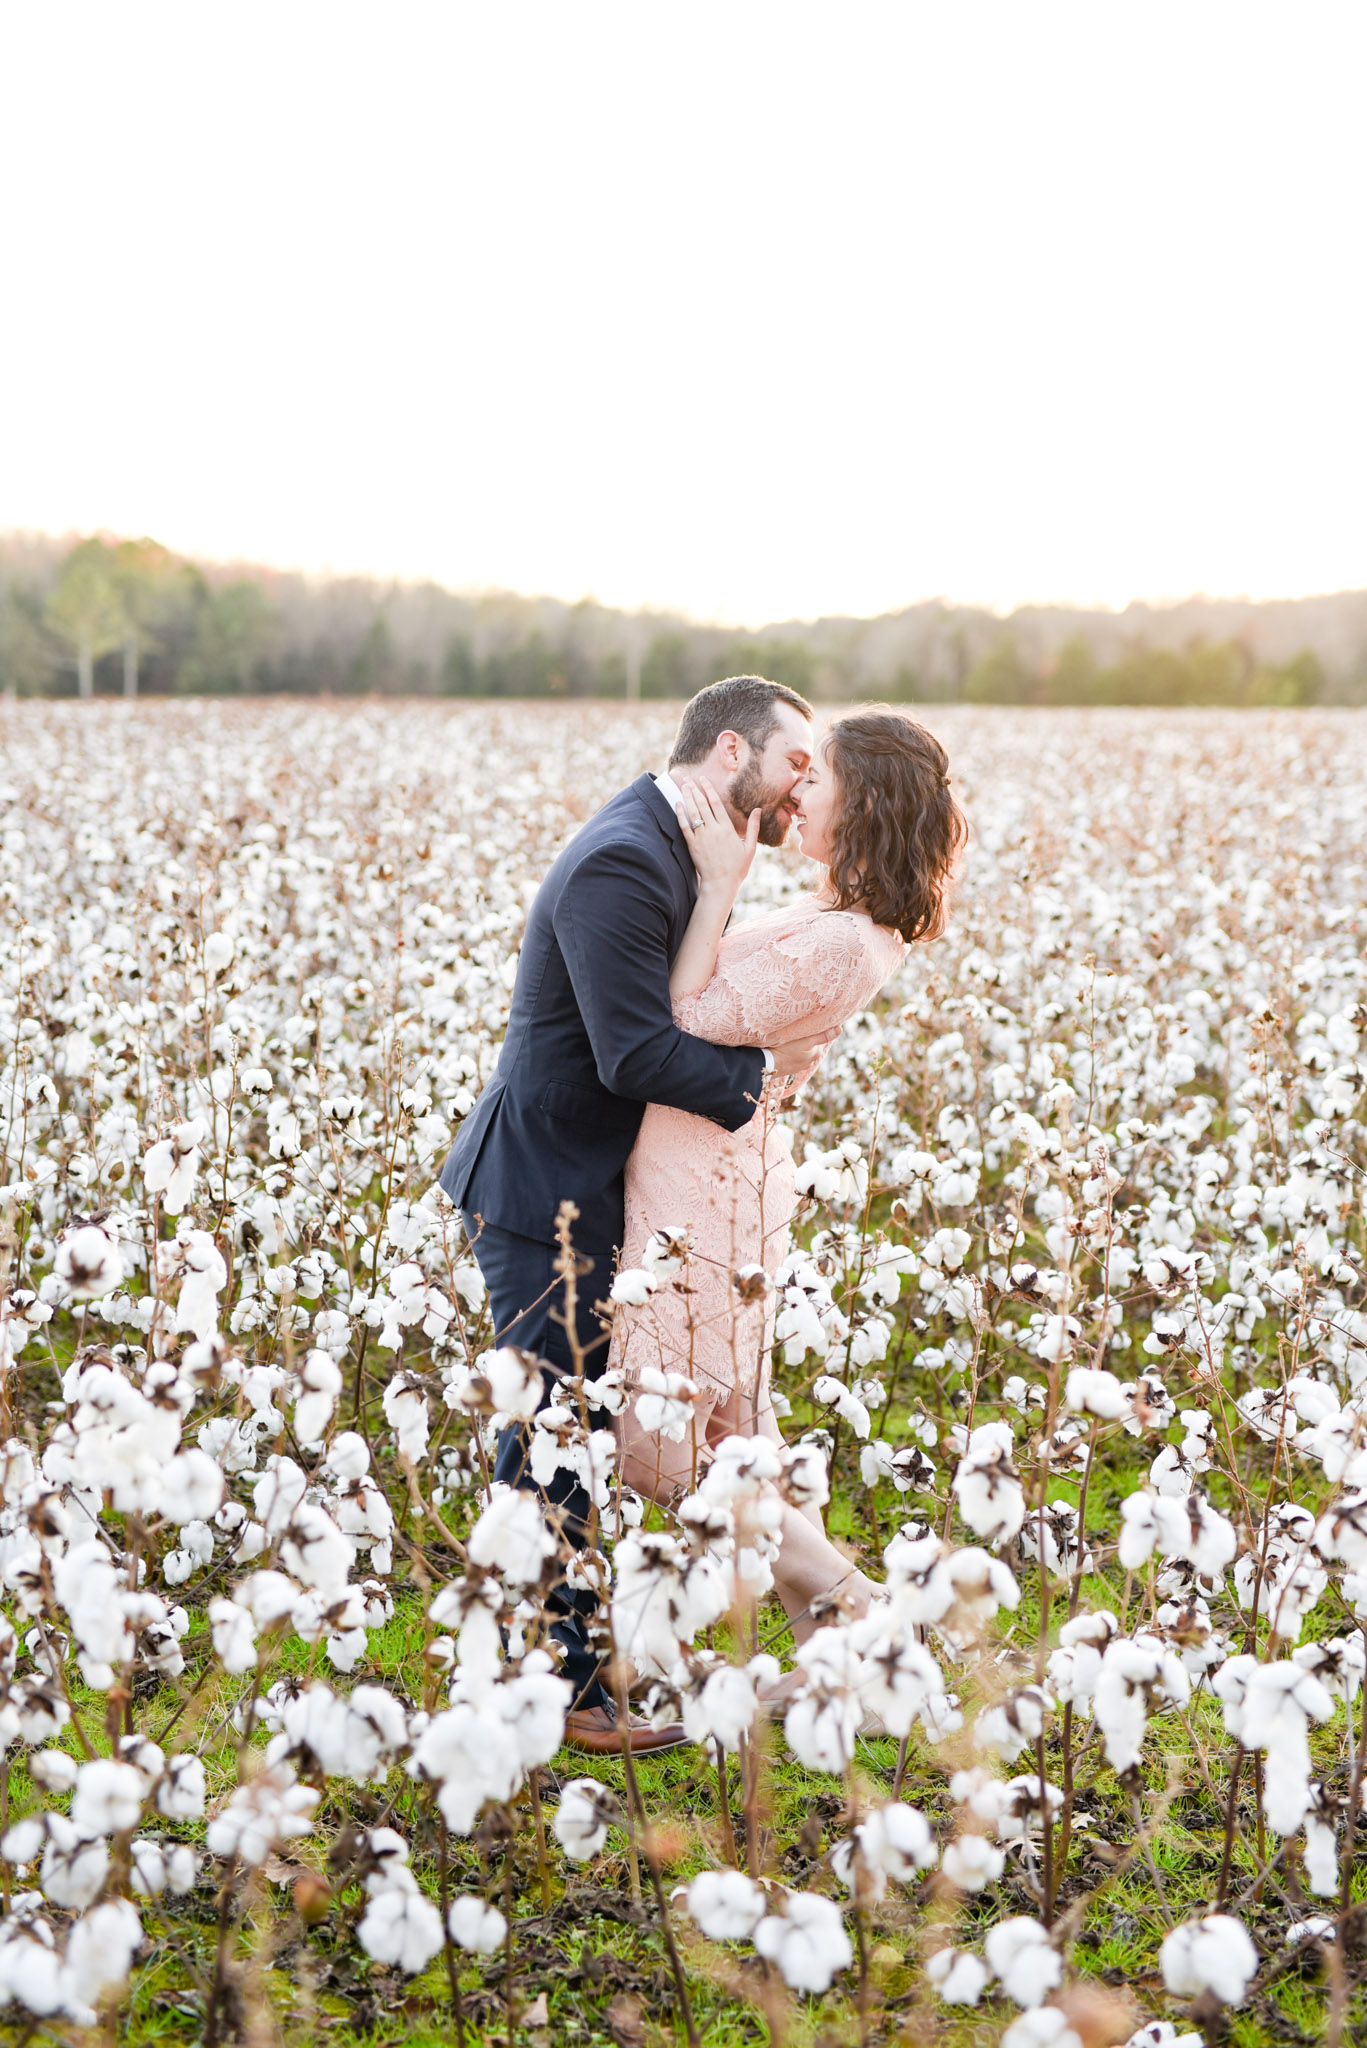 Couple almost kisses in cotton field.